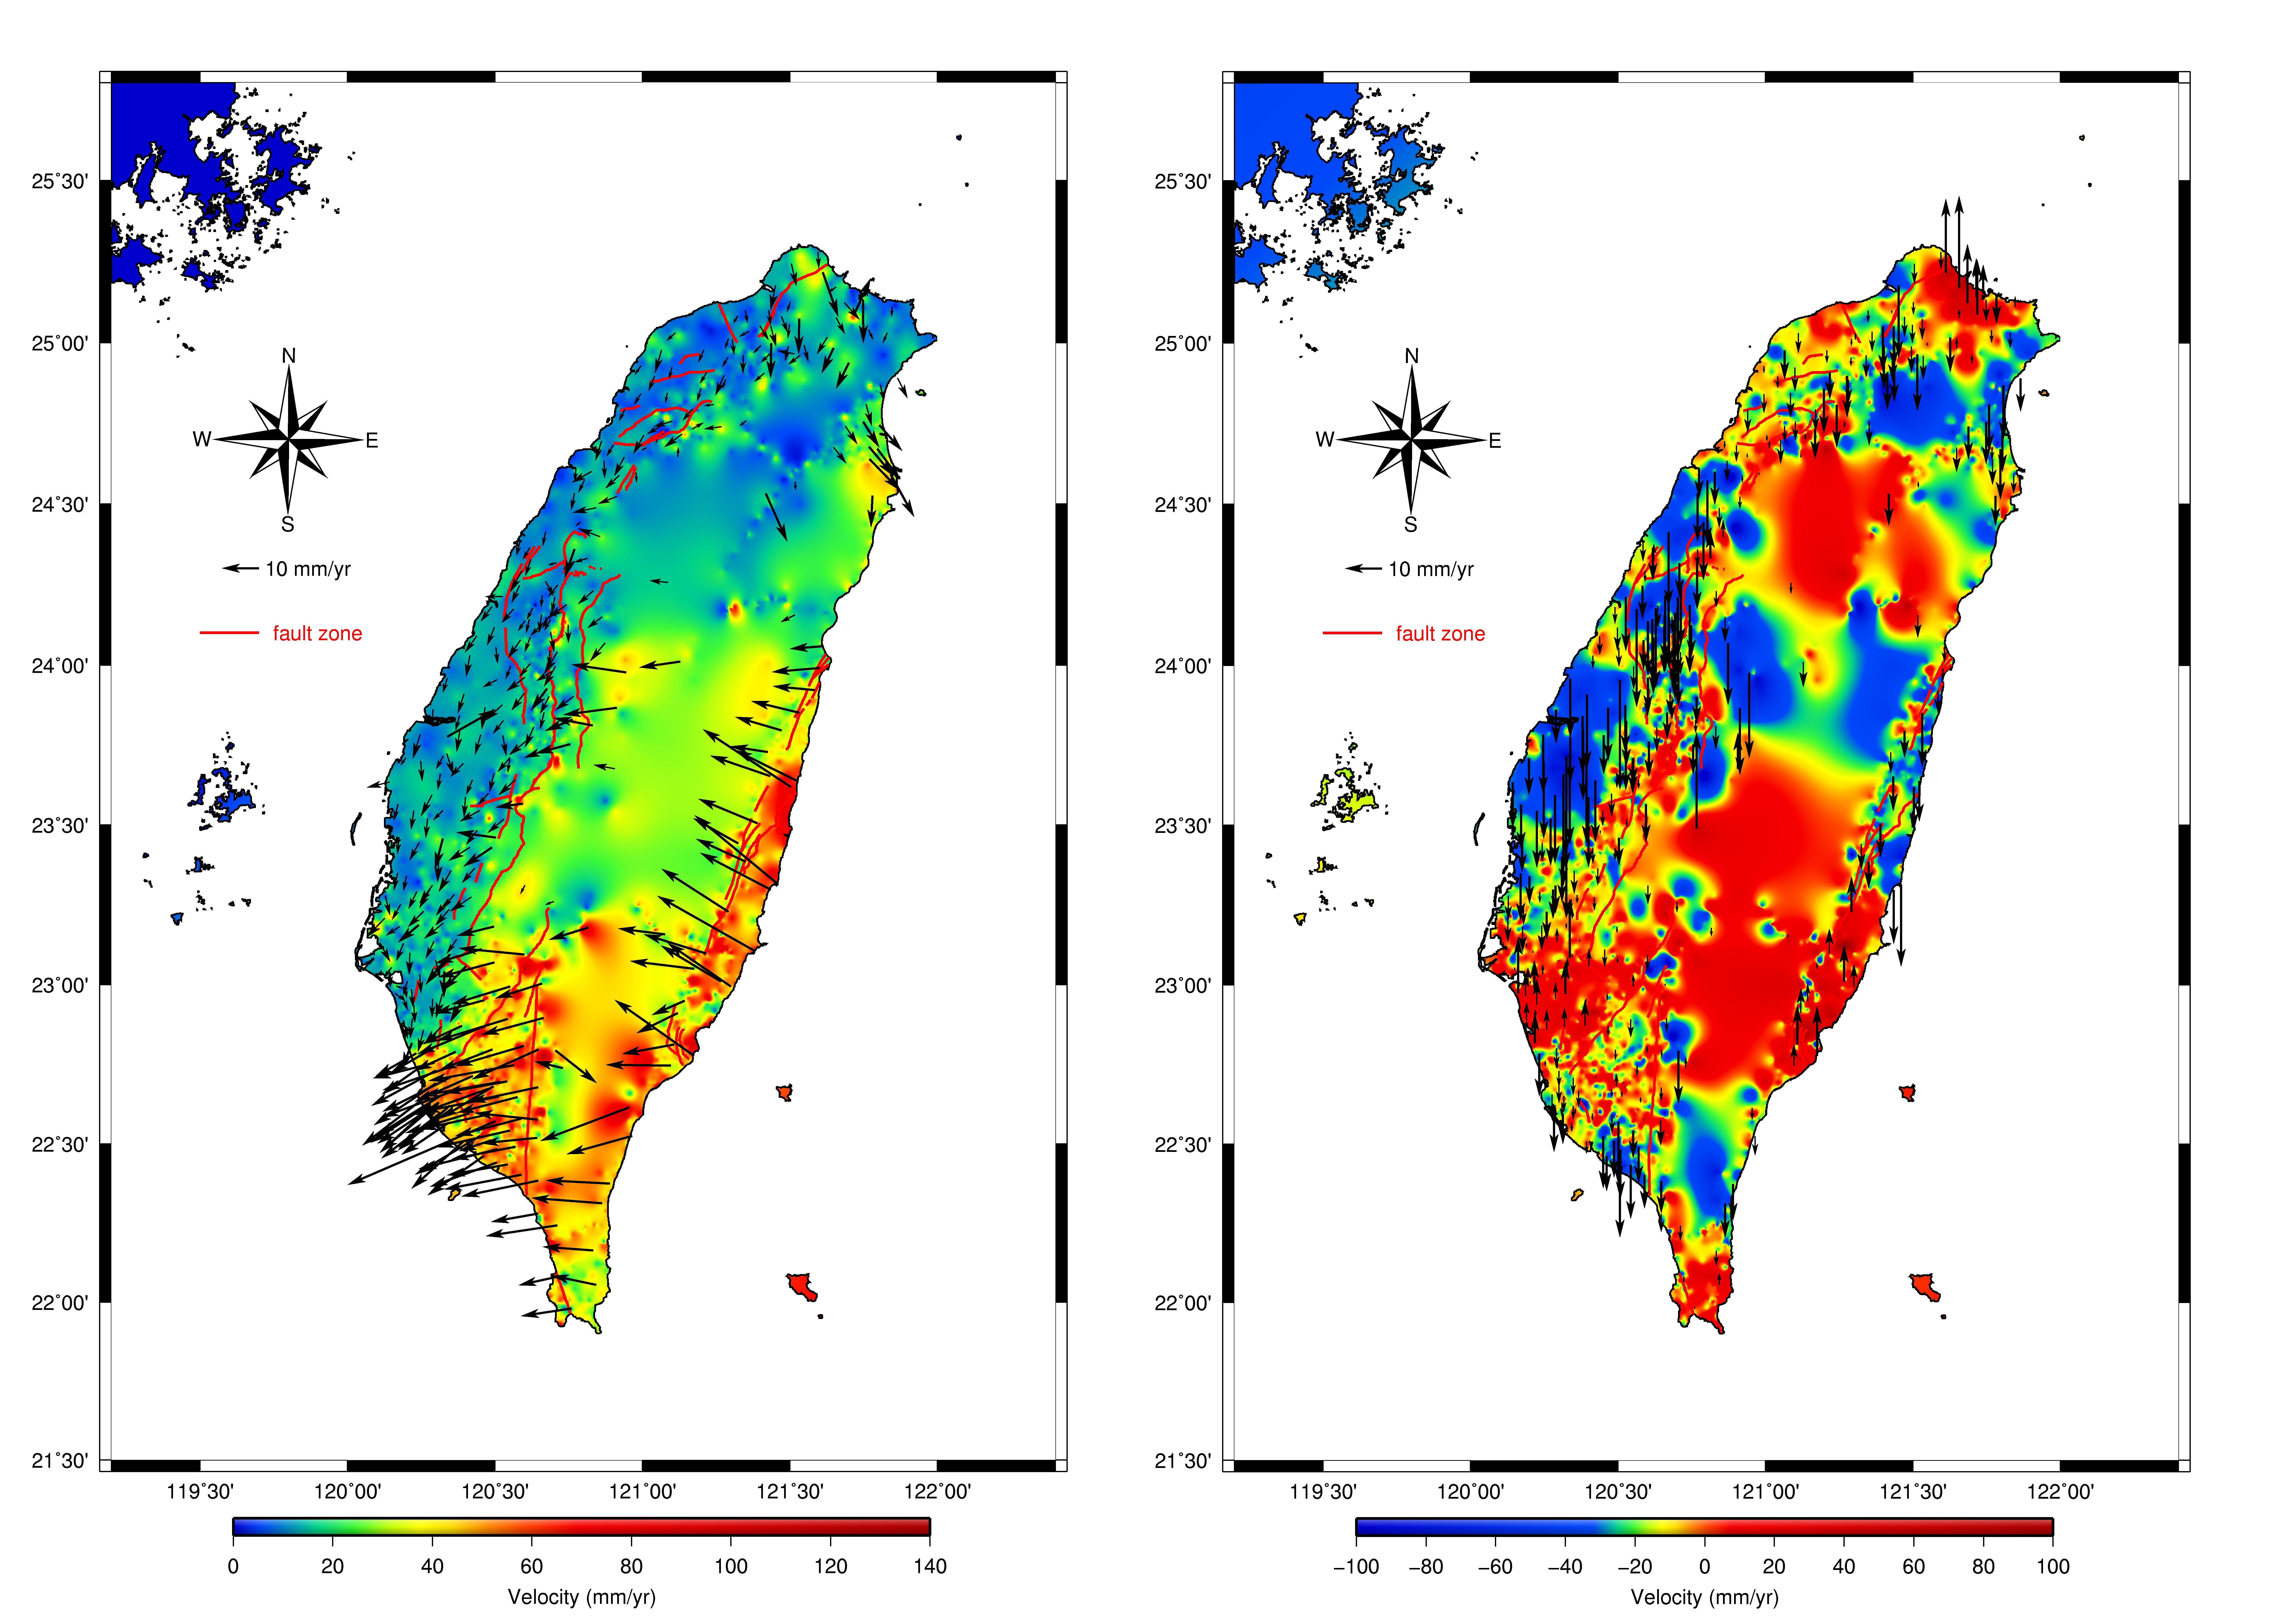 Velocity field deformation diagram of Taiwan along horizontal and vertical direction